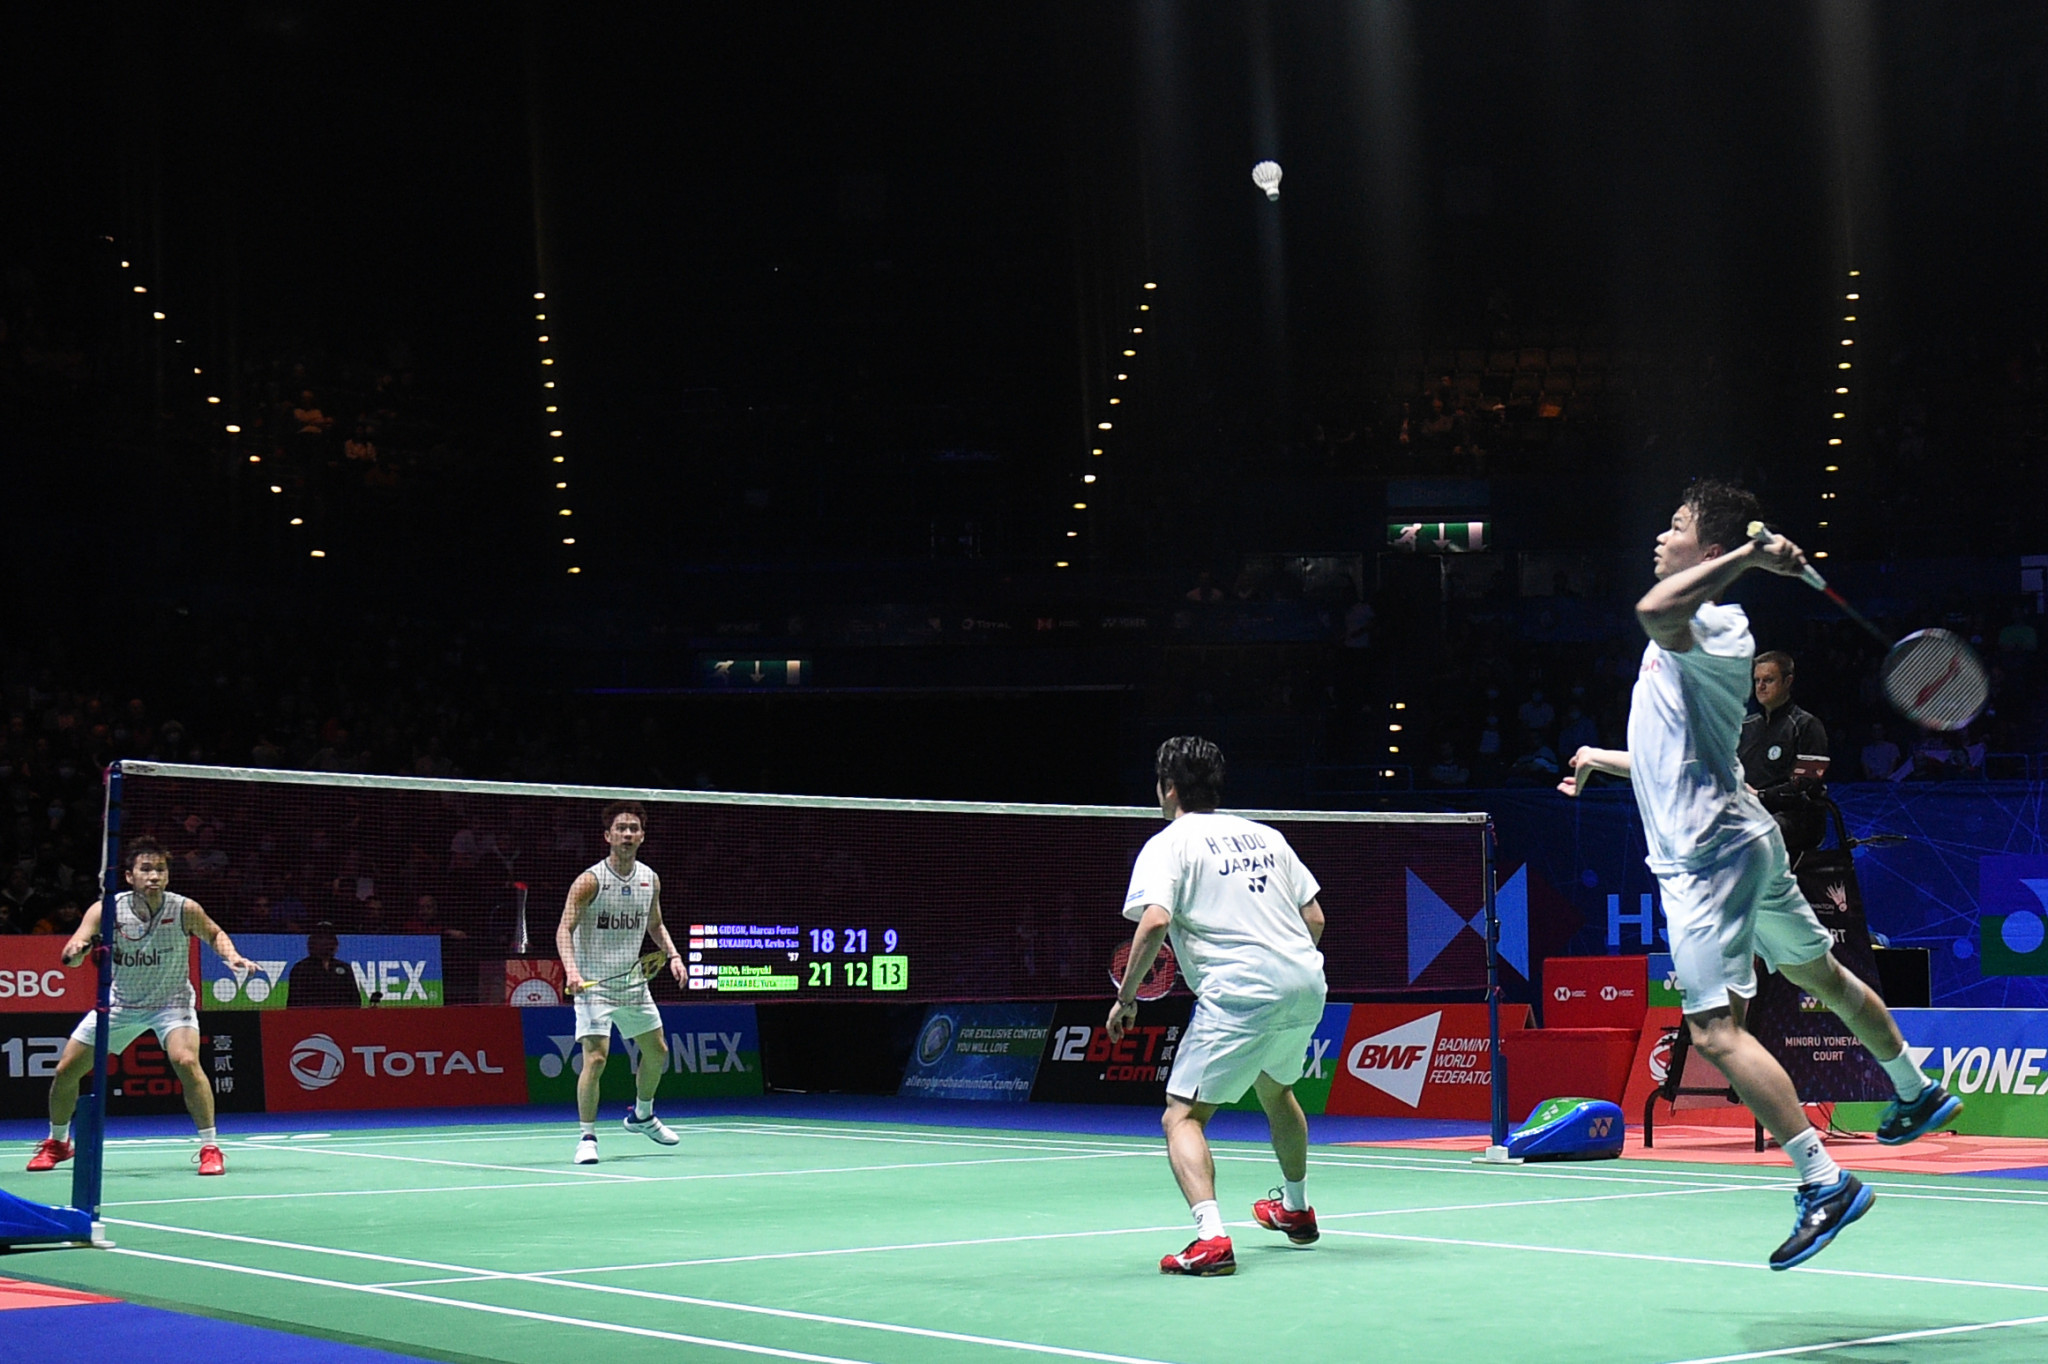 Badminton's season was halted after the All England Championships back in March ©Getty Images